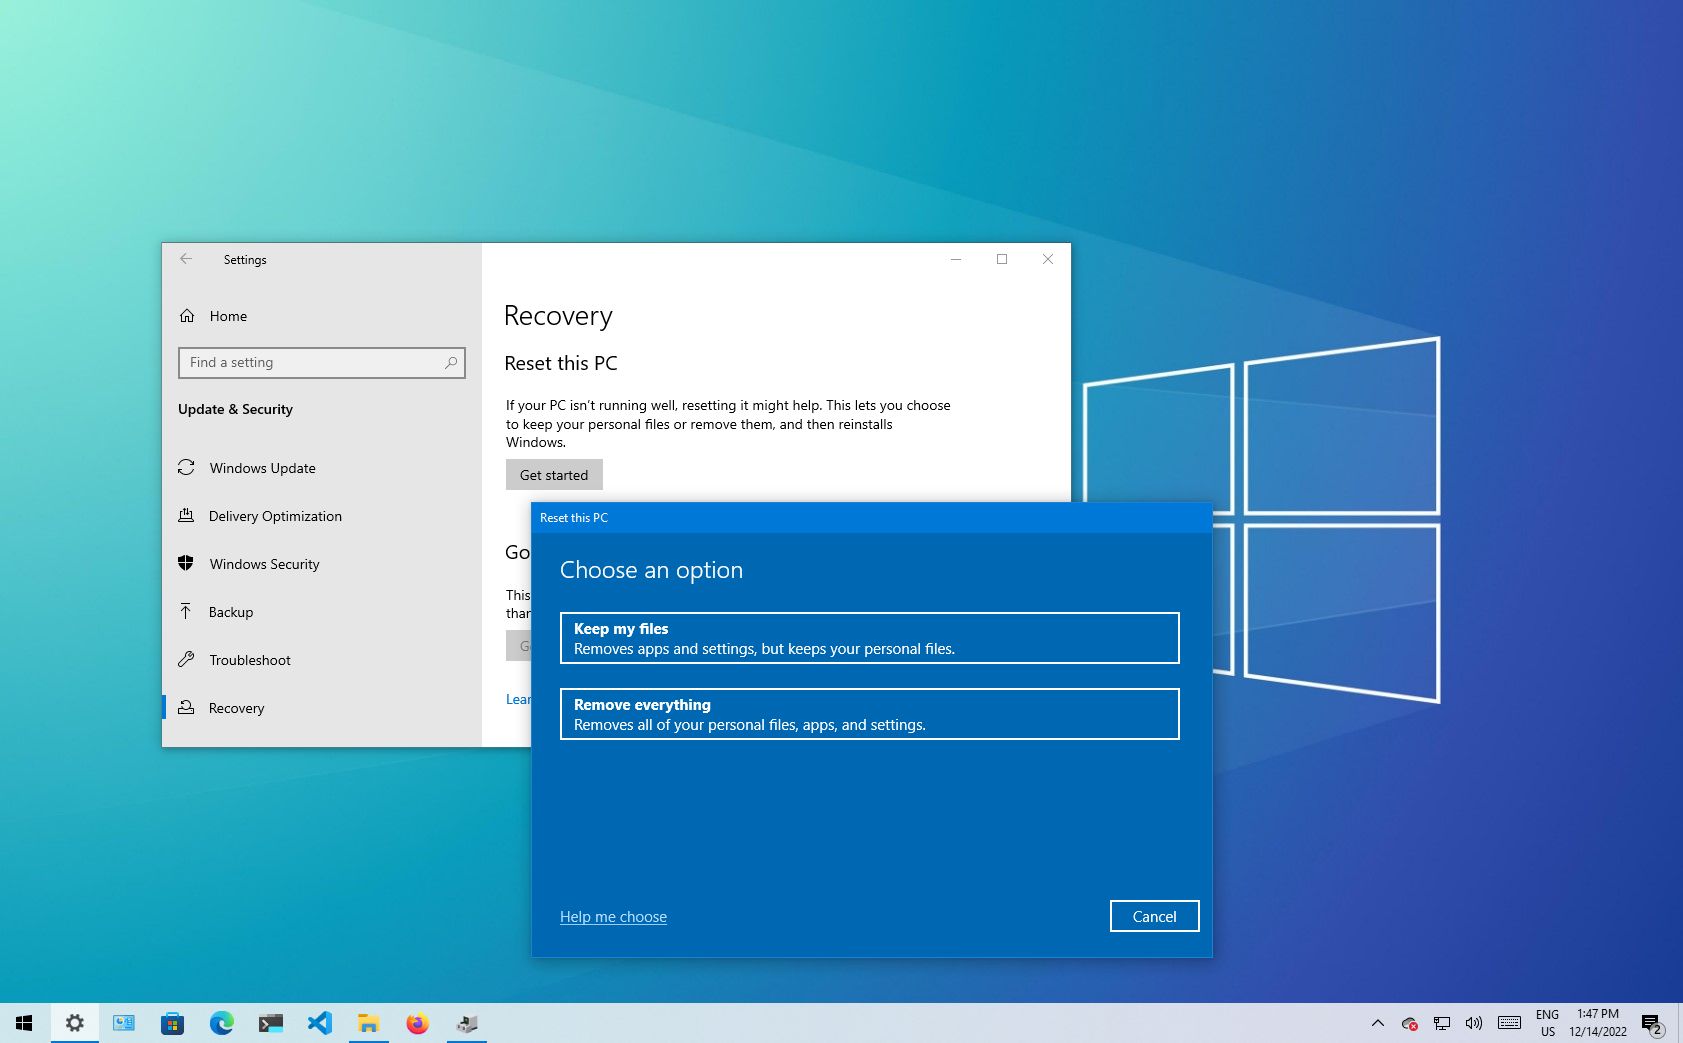 Step-by-Step Guide on How to Factory Reset Windows 10 - Initiating the Factory Reset